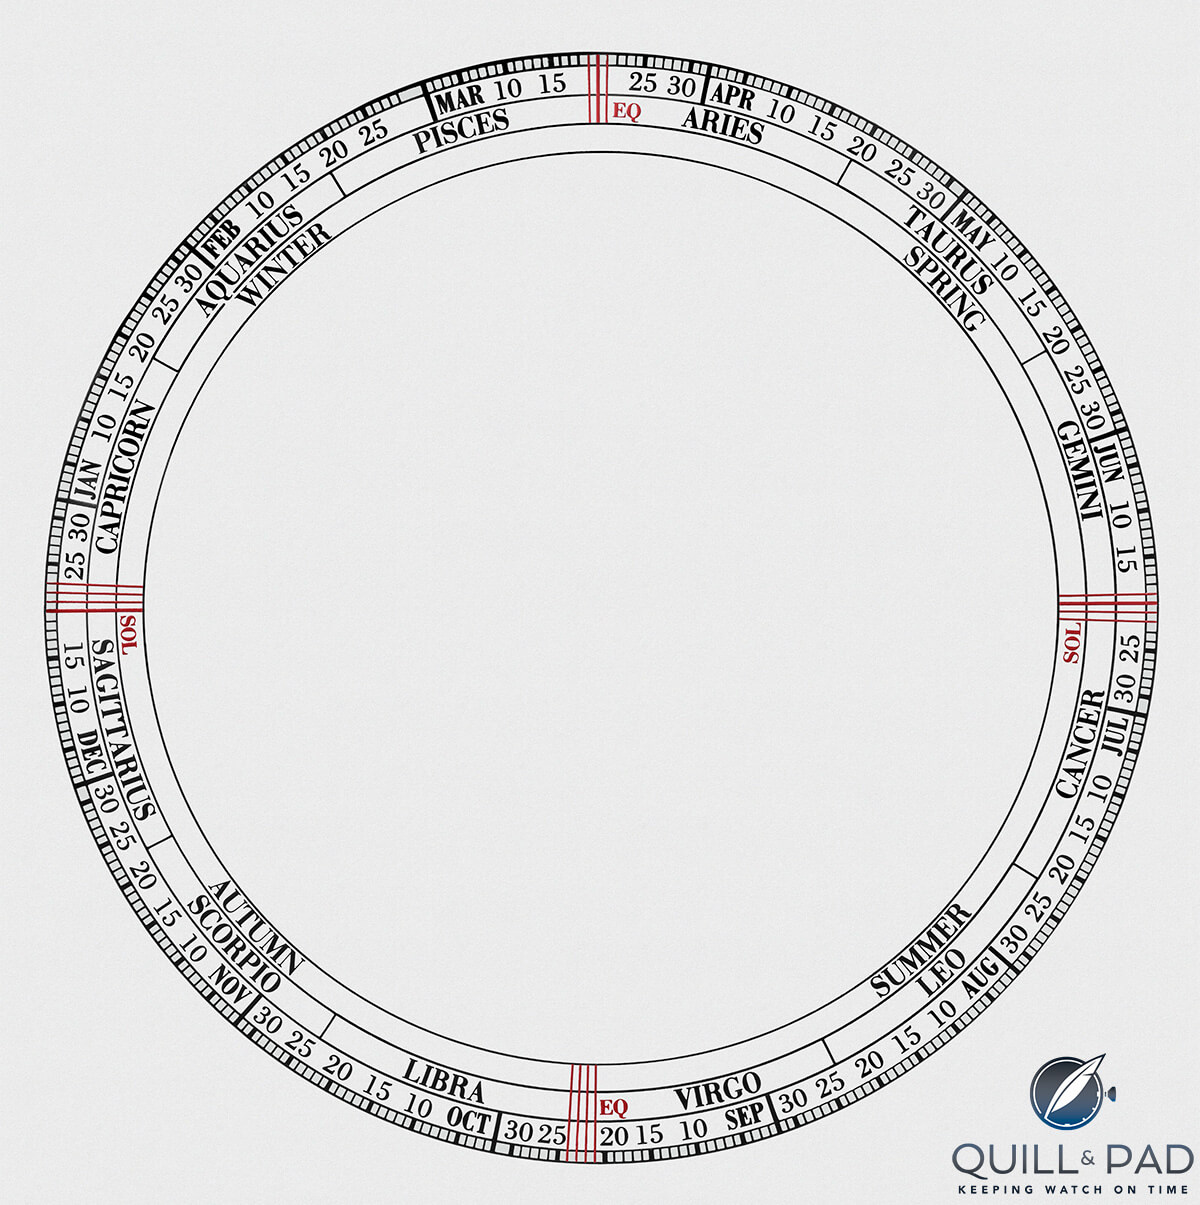 The seasonal astronomical indication ring of Vacheron Constantin's 260th anniversary 